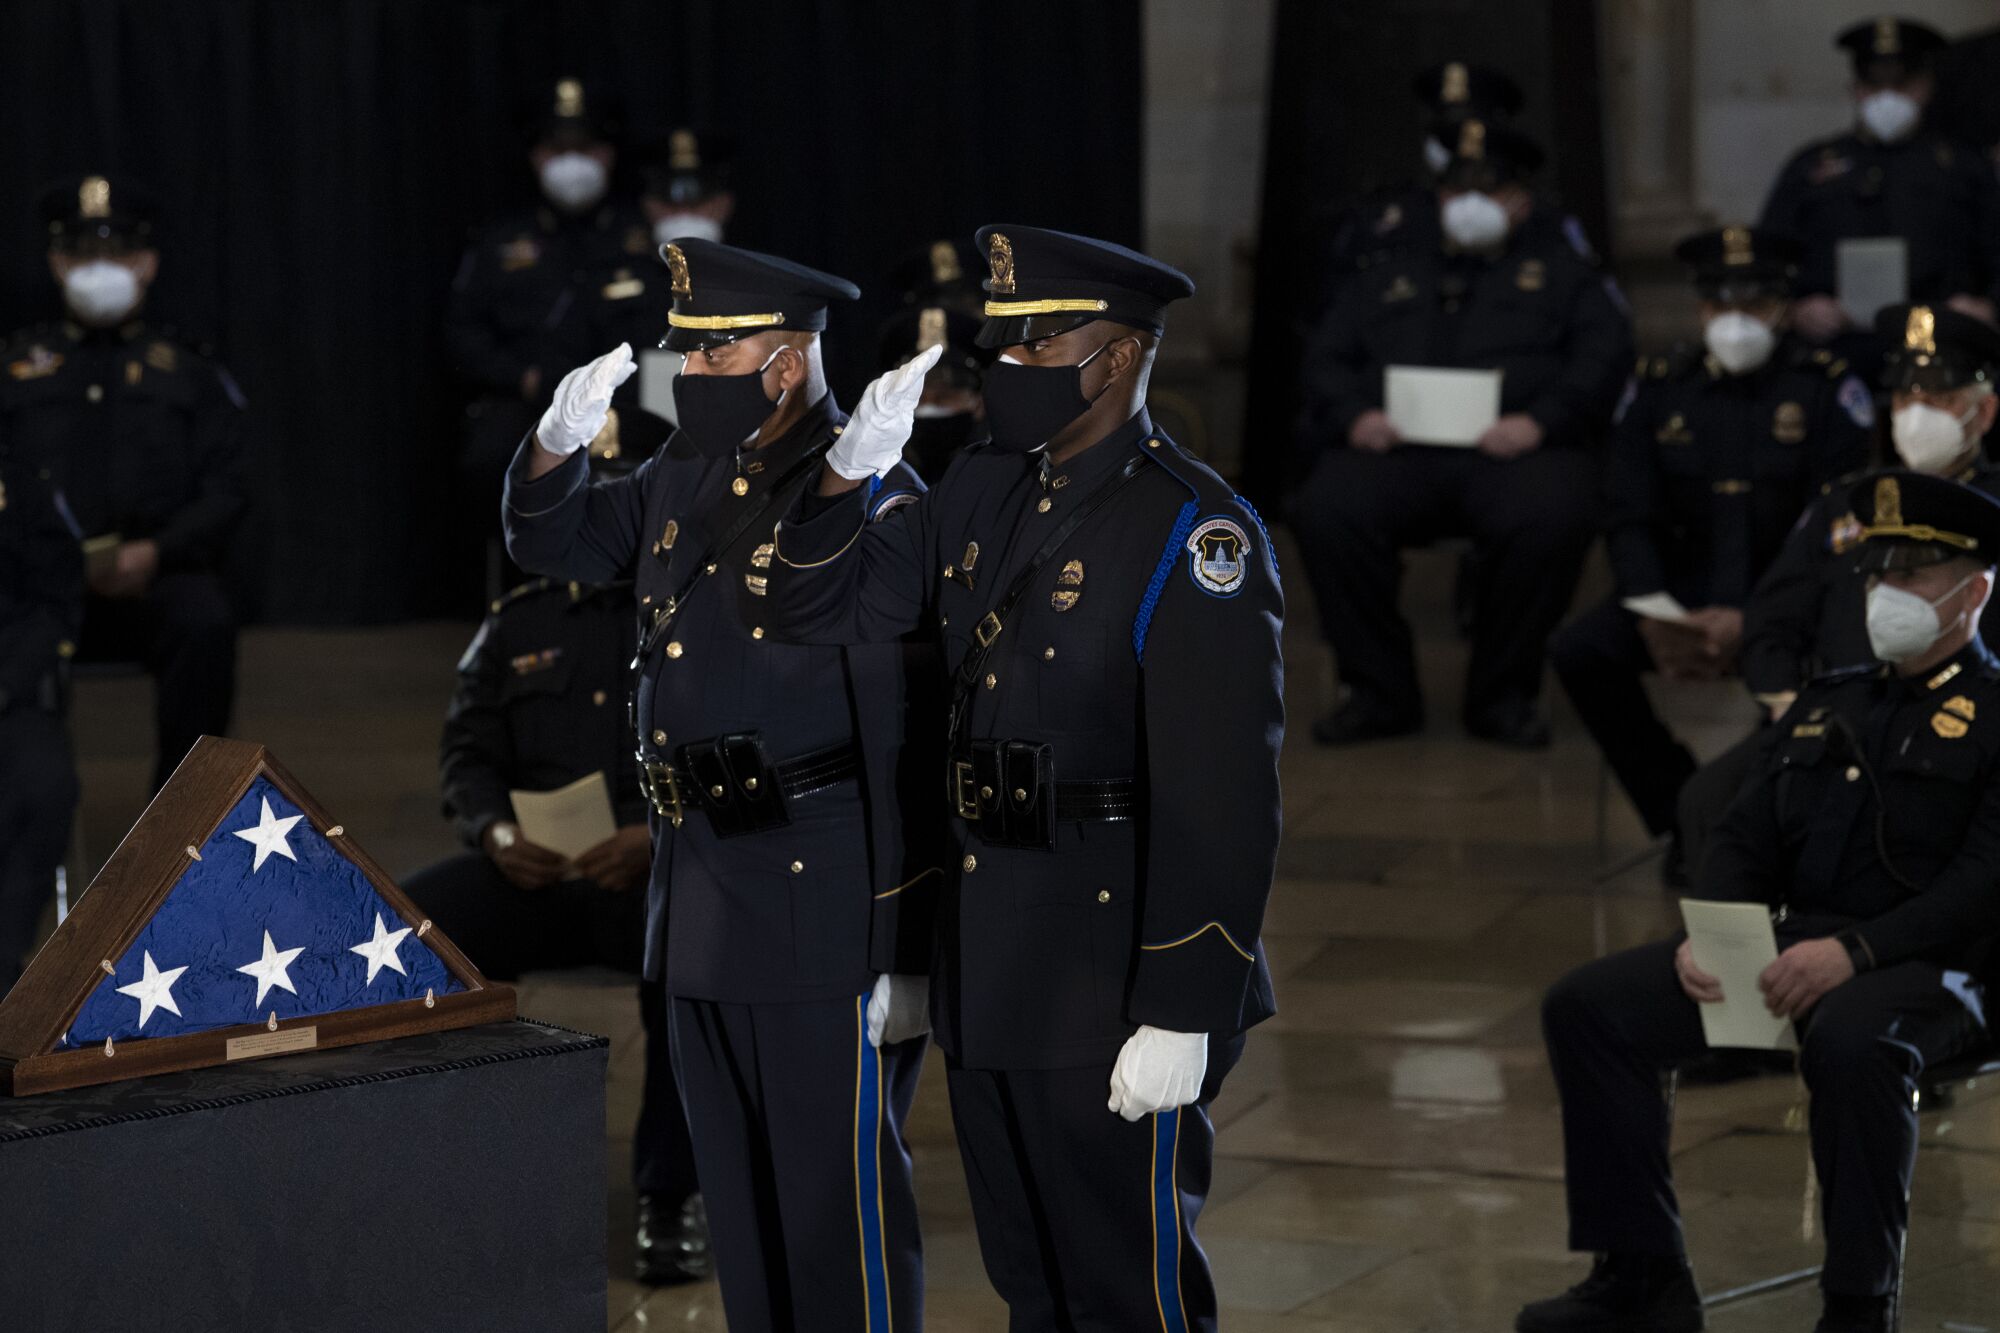  Police officers pay respects